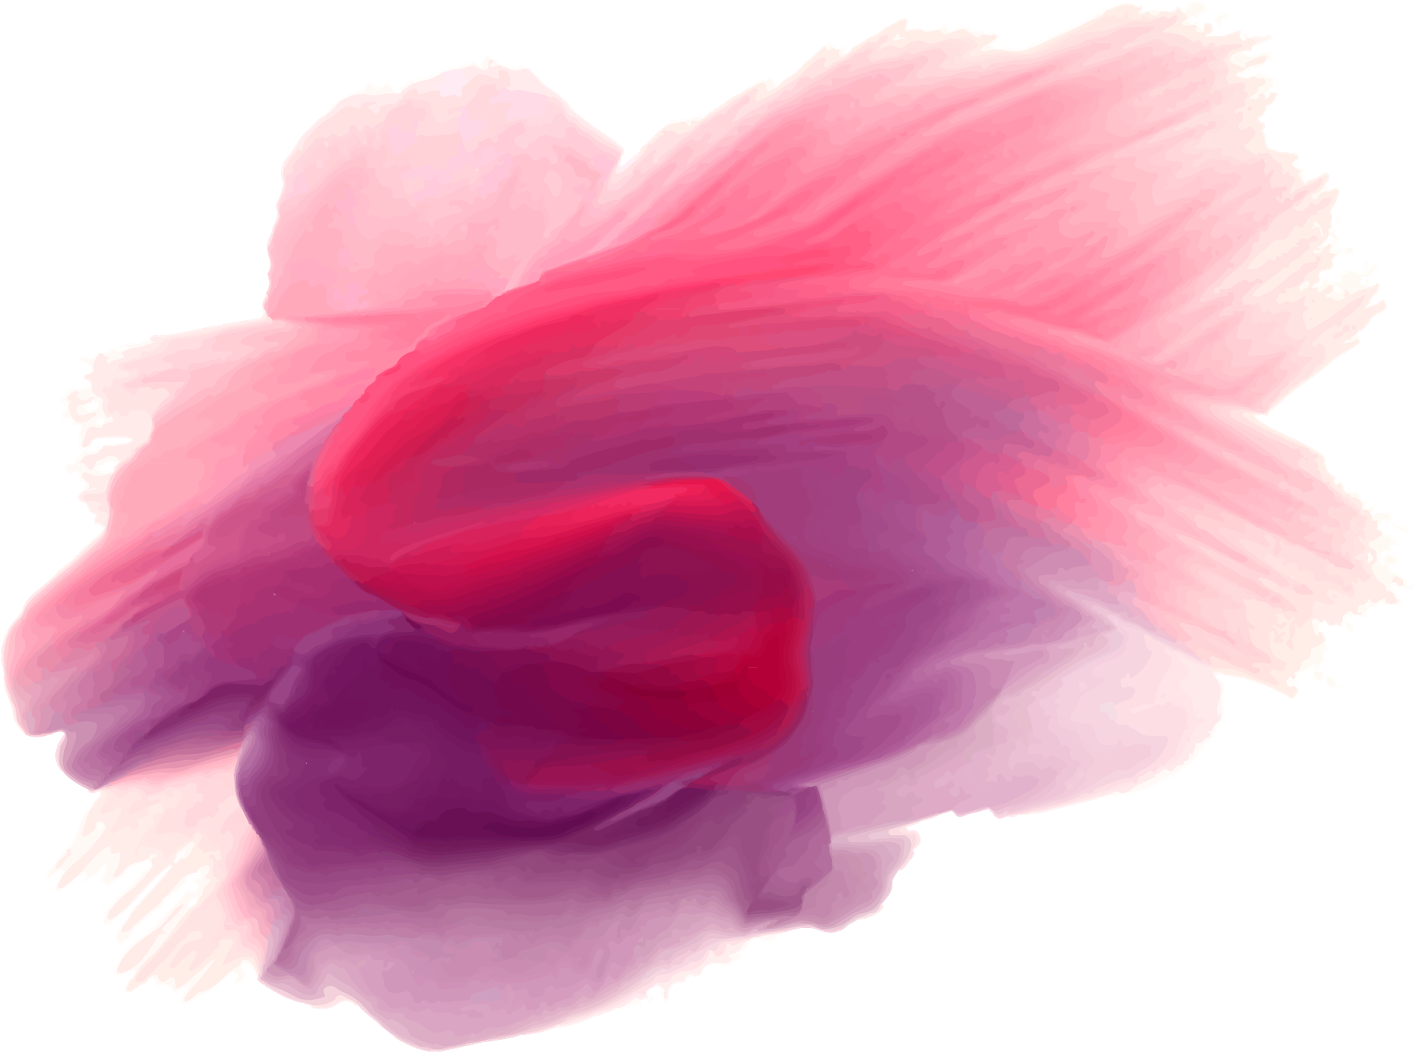 Brush Stroke PNG High-Quality Image